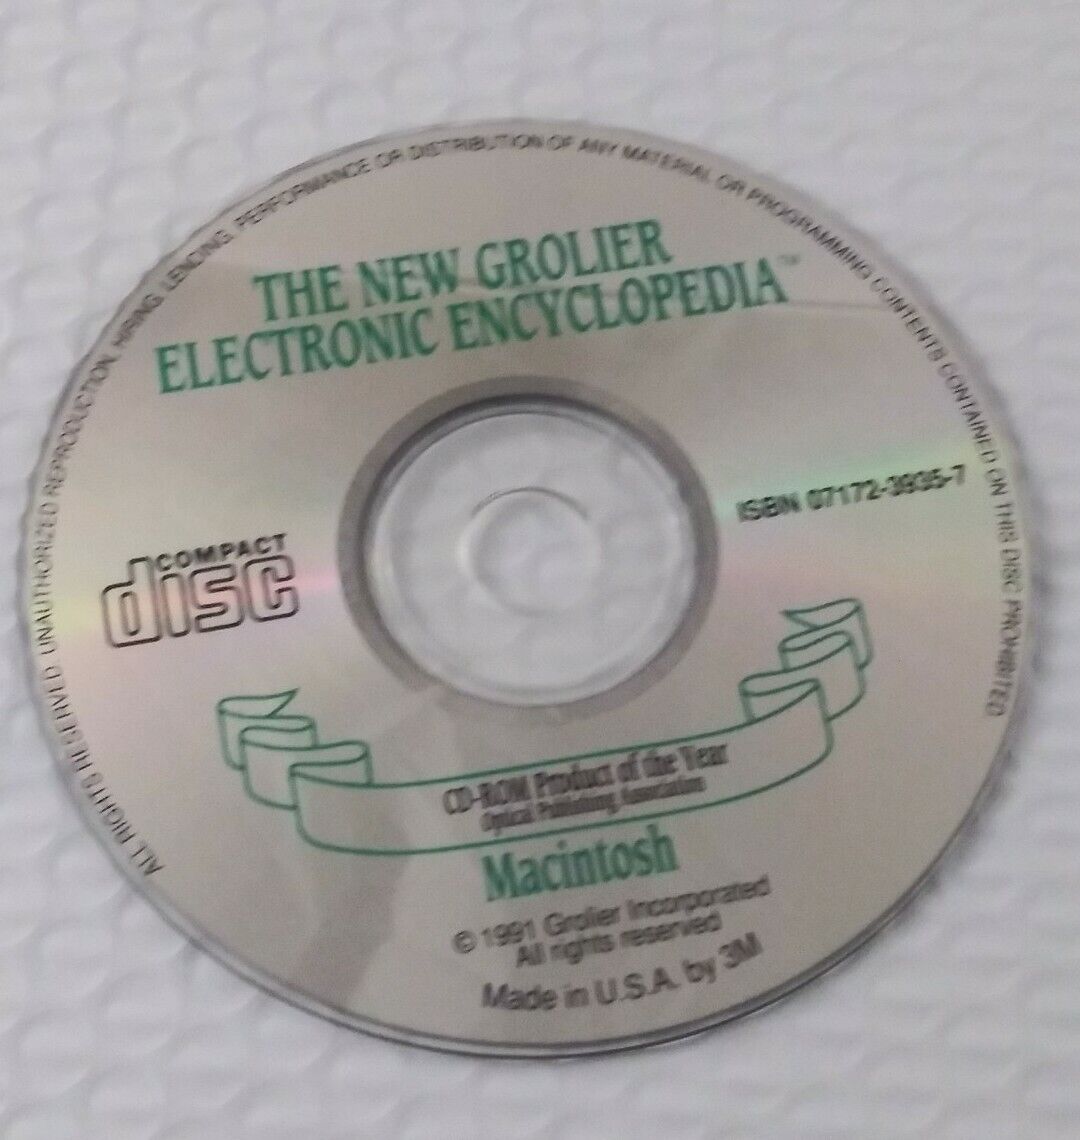 The New Grolier Electronic Encyclopedia for Mac 1991 Vintage CD Disc only USA